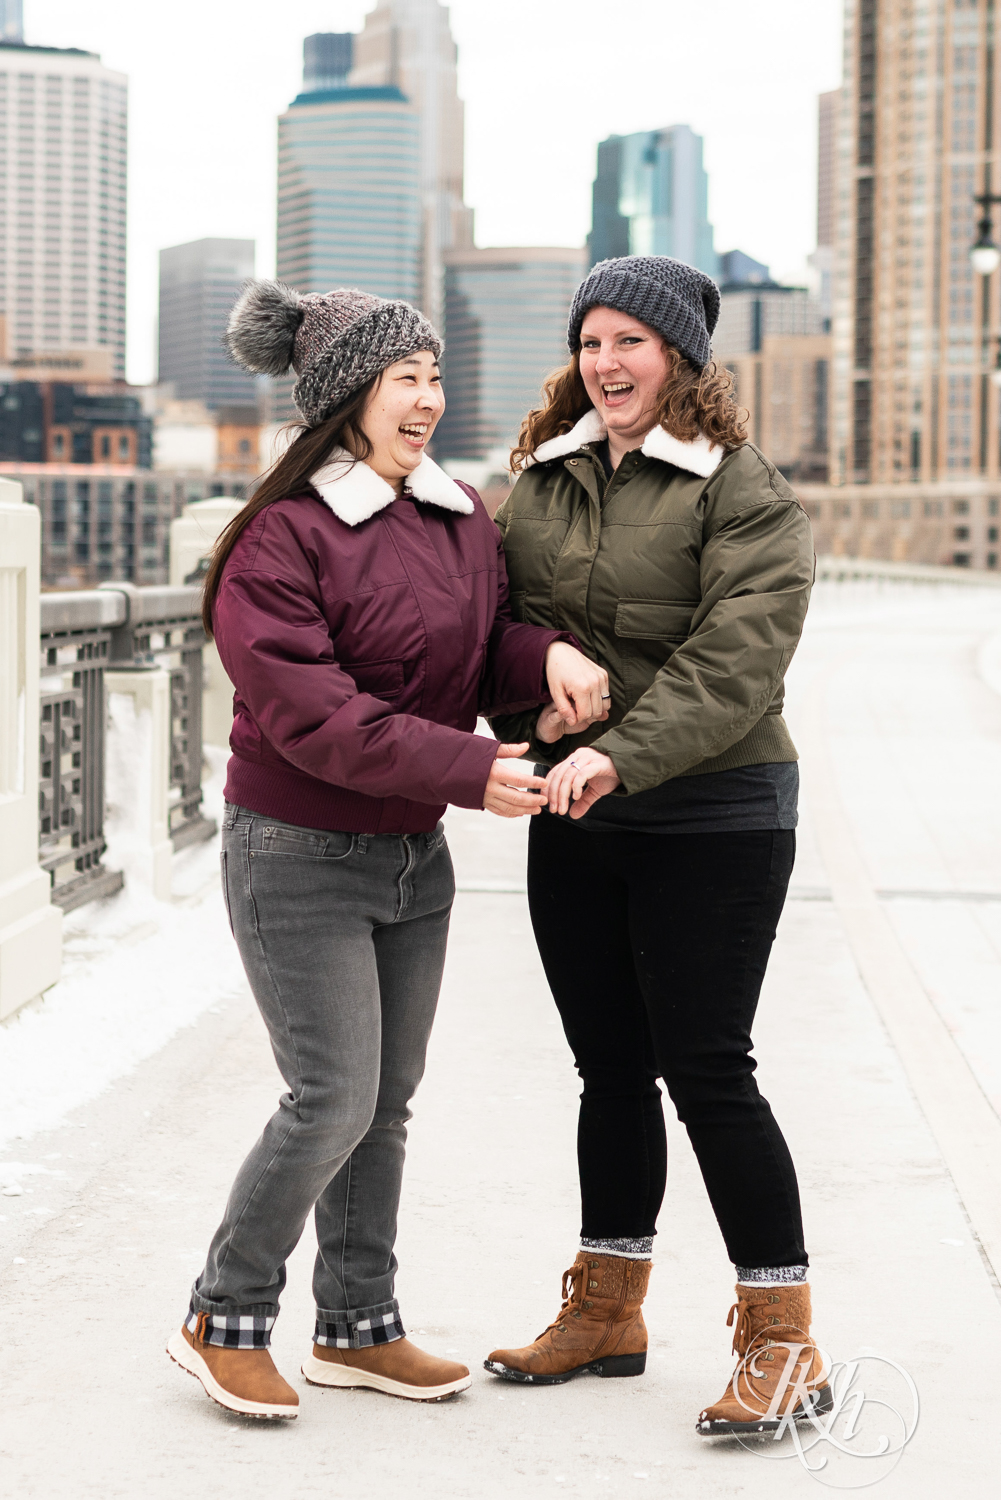 Red headed woman and Asian woman in jackets walk down Third Street Bridge during winter engagement photography in Minneapolis, Minnesota.